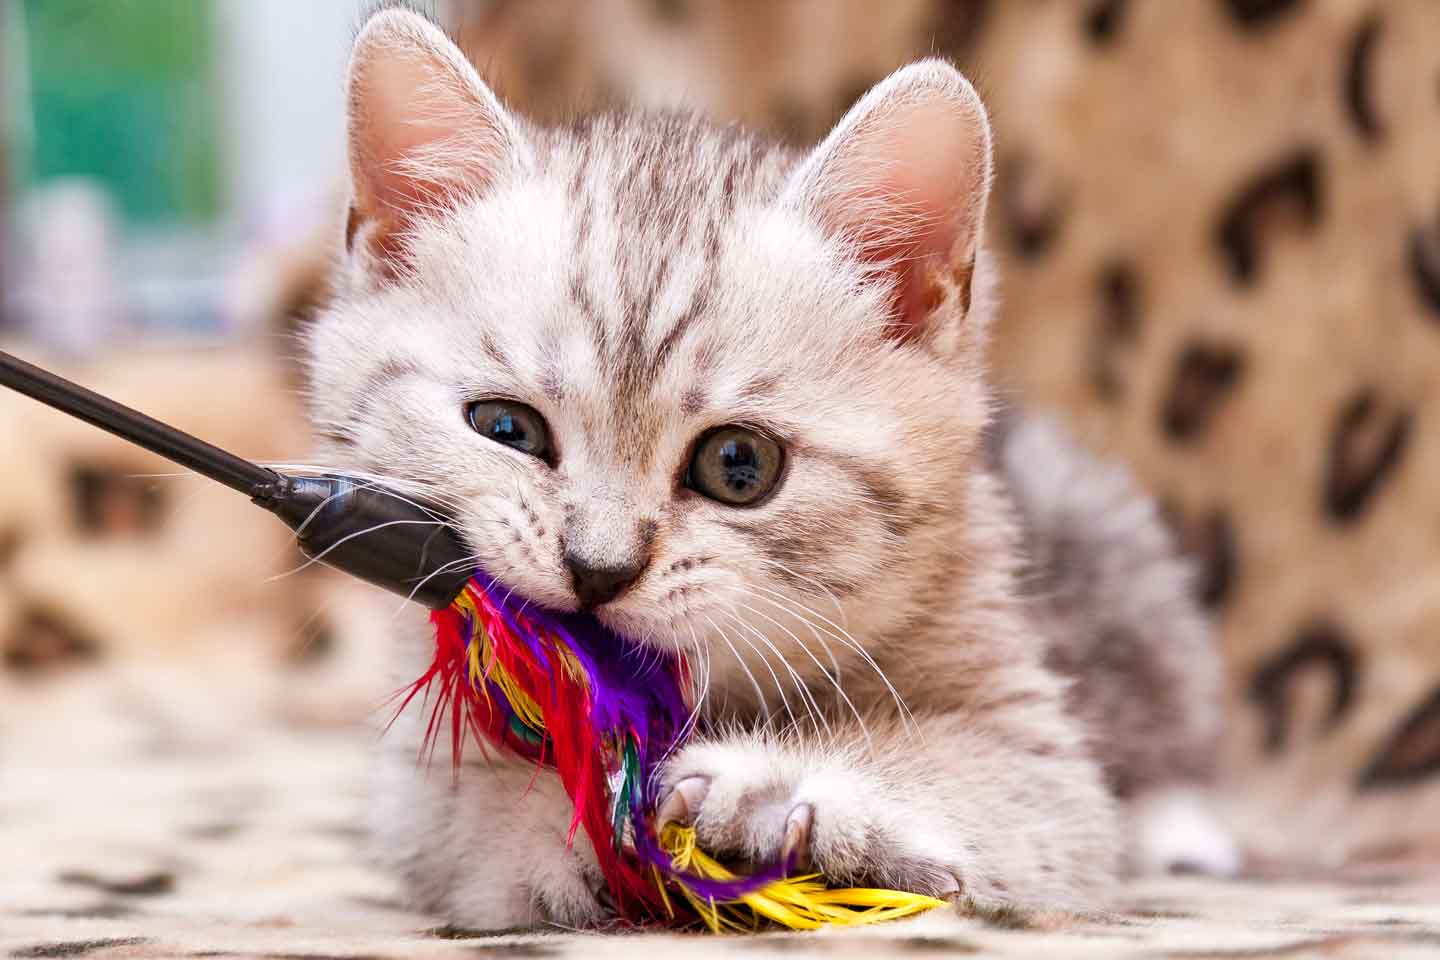 Photo of a kitten playing with a wand toy